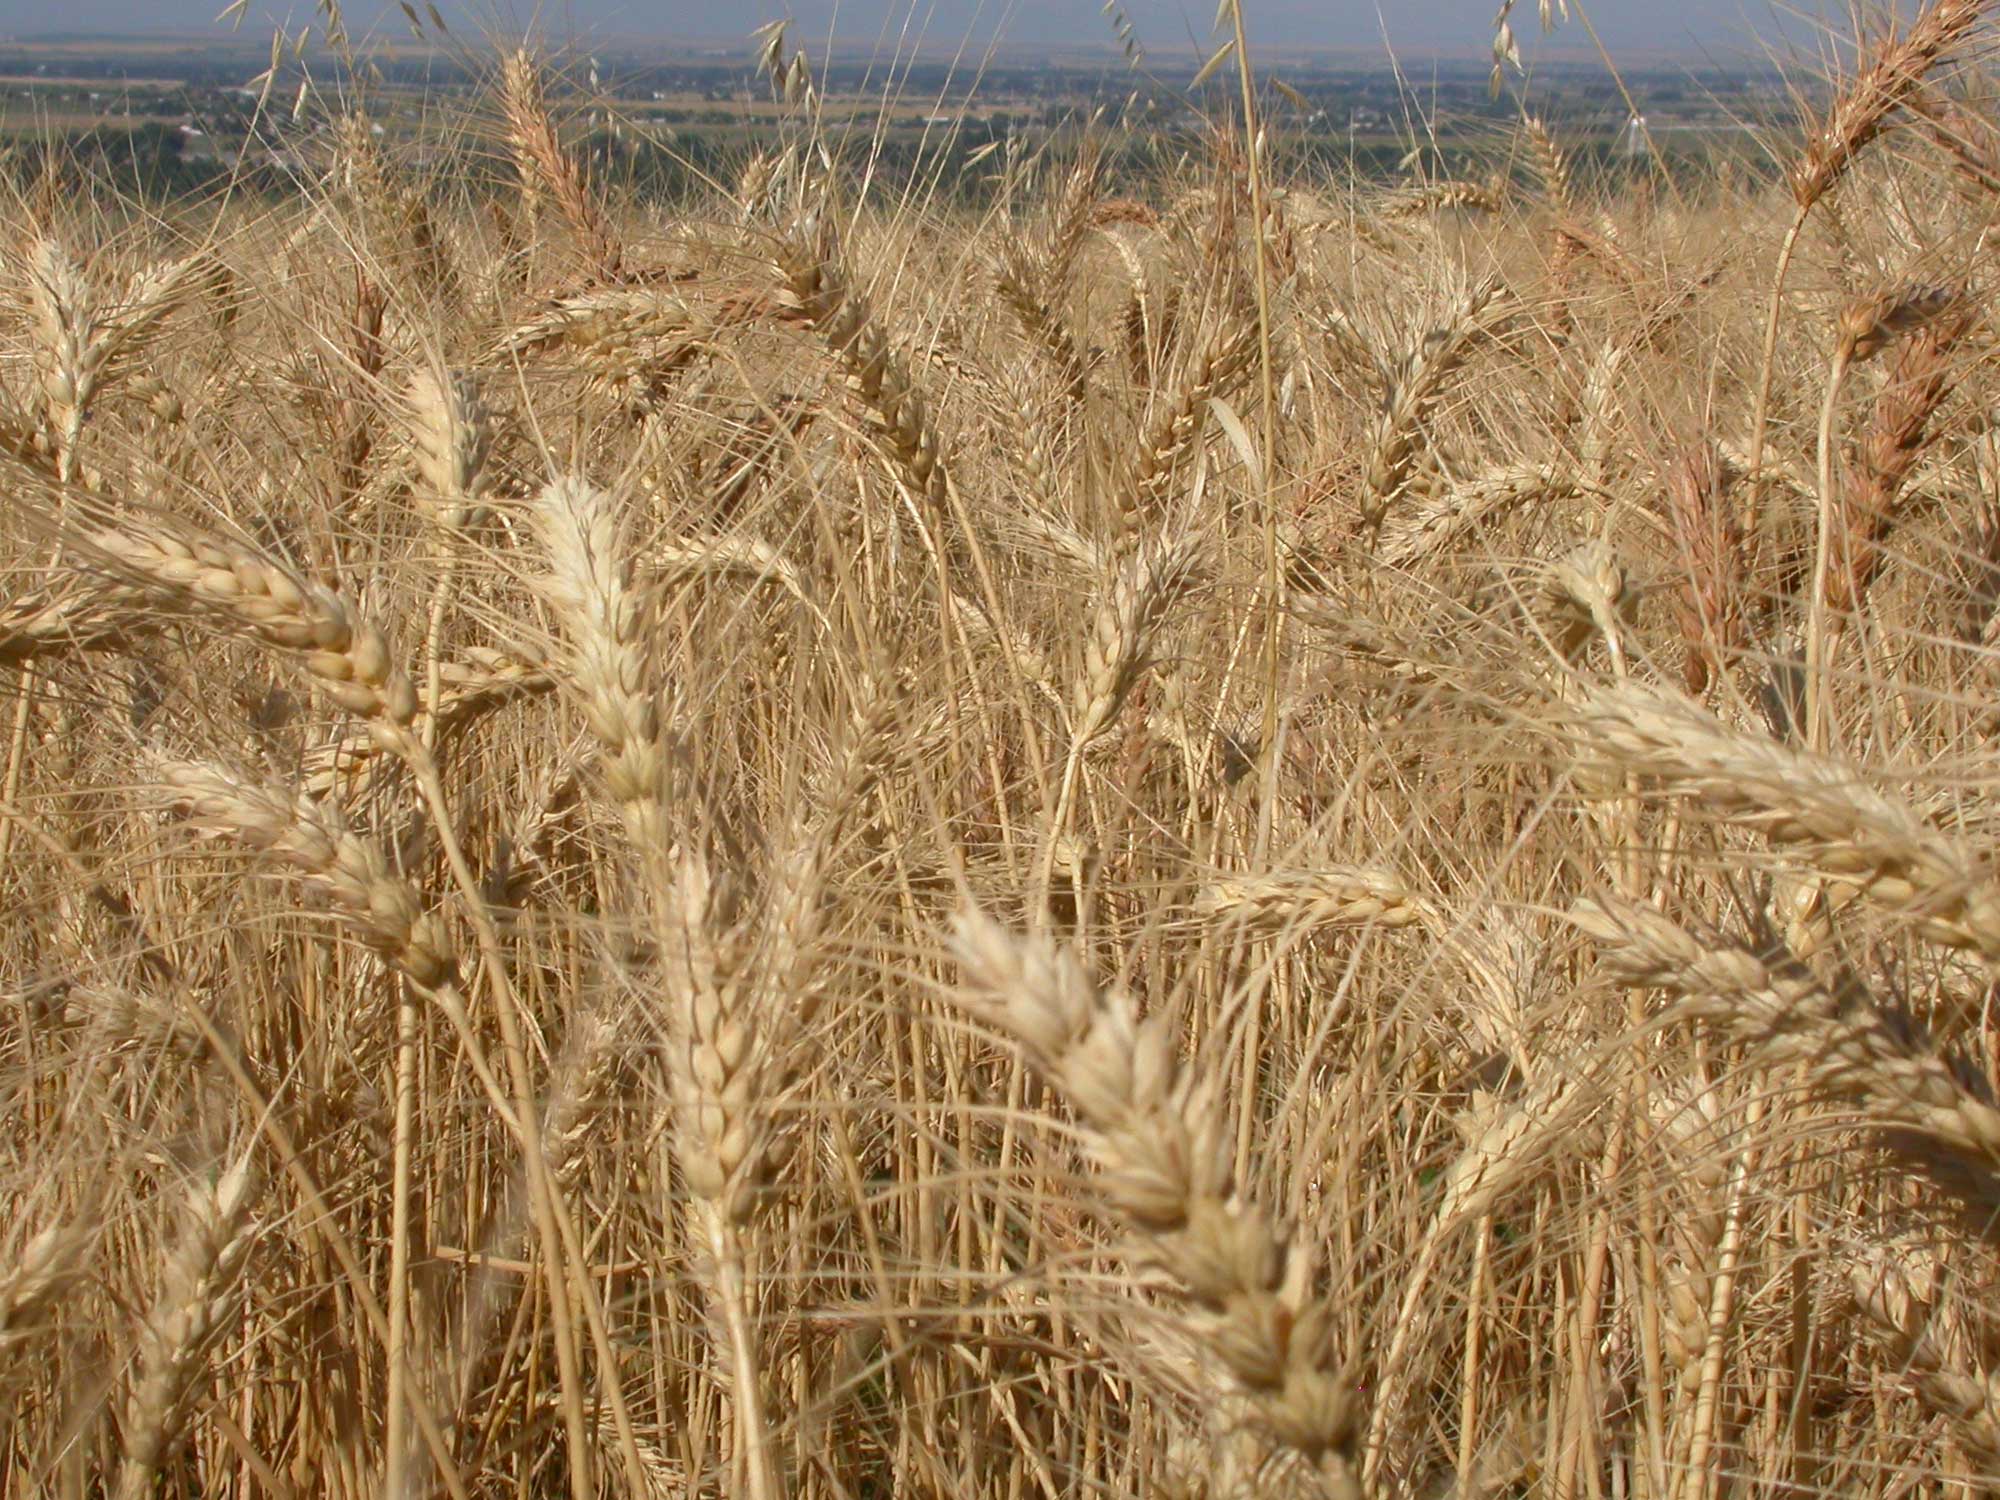 Photograph of a field of dry bread wheat plants. The photo is a close-up, showing the beige ears of multiple plants that are growing in a field.